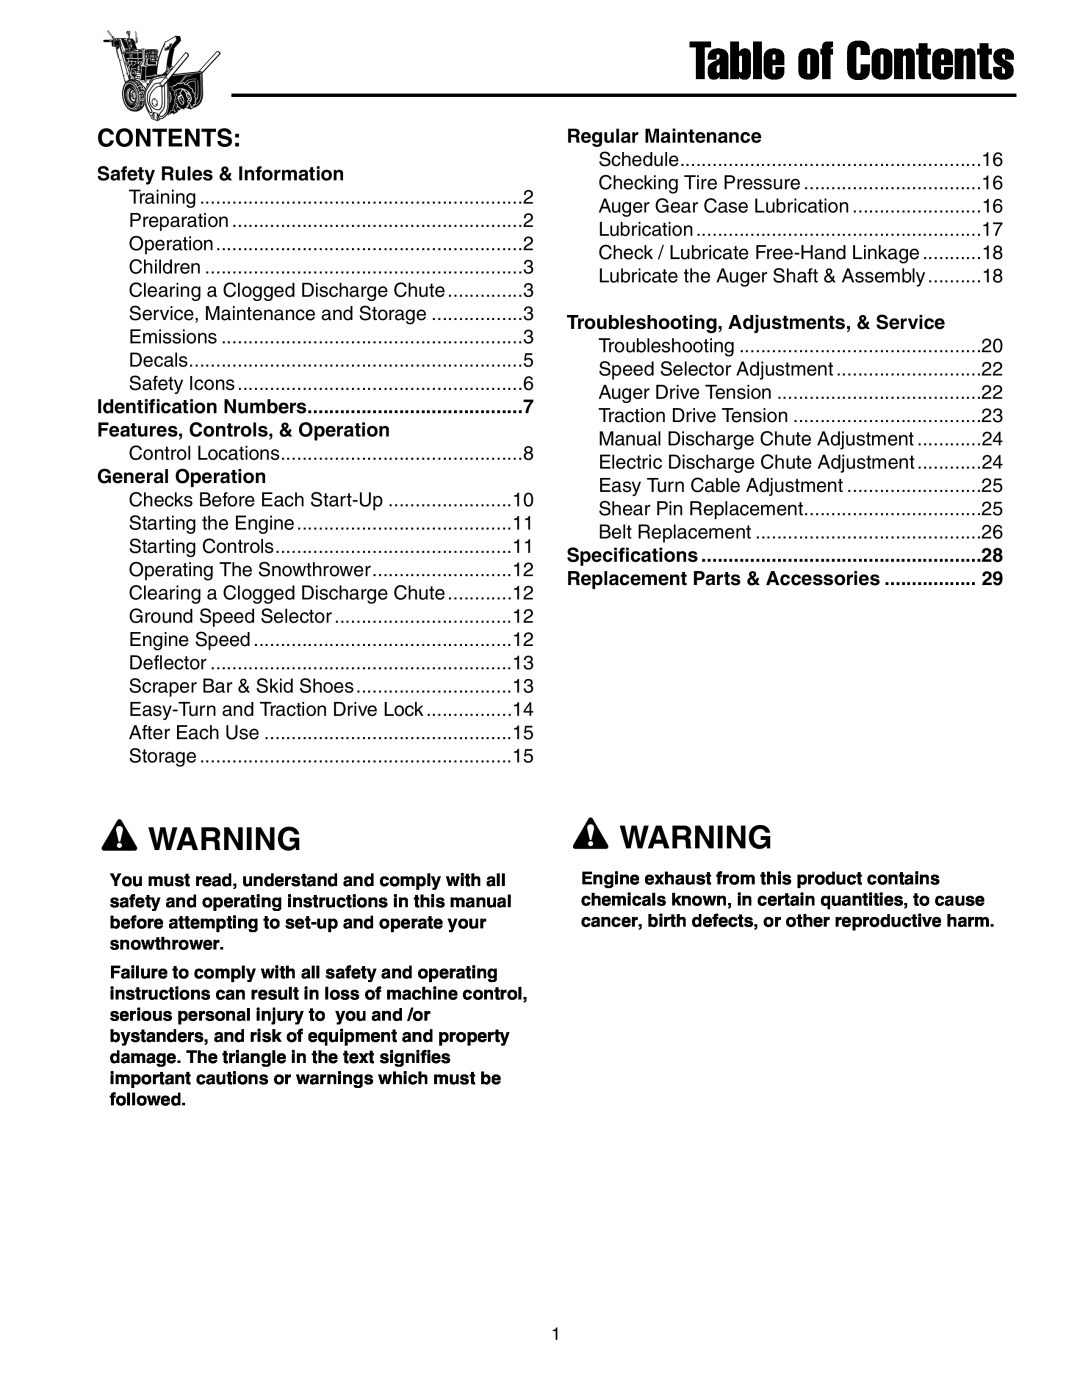 Snapper 10524, 11528, 1332, 1338, 13388 Table of Contents, Regular Maintenance, Safety Rules & Information, Specifications 